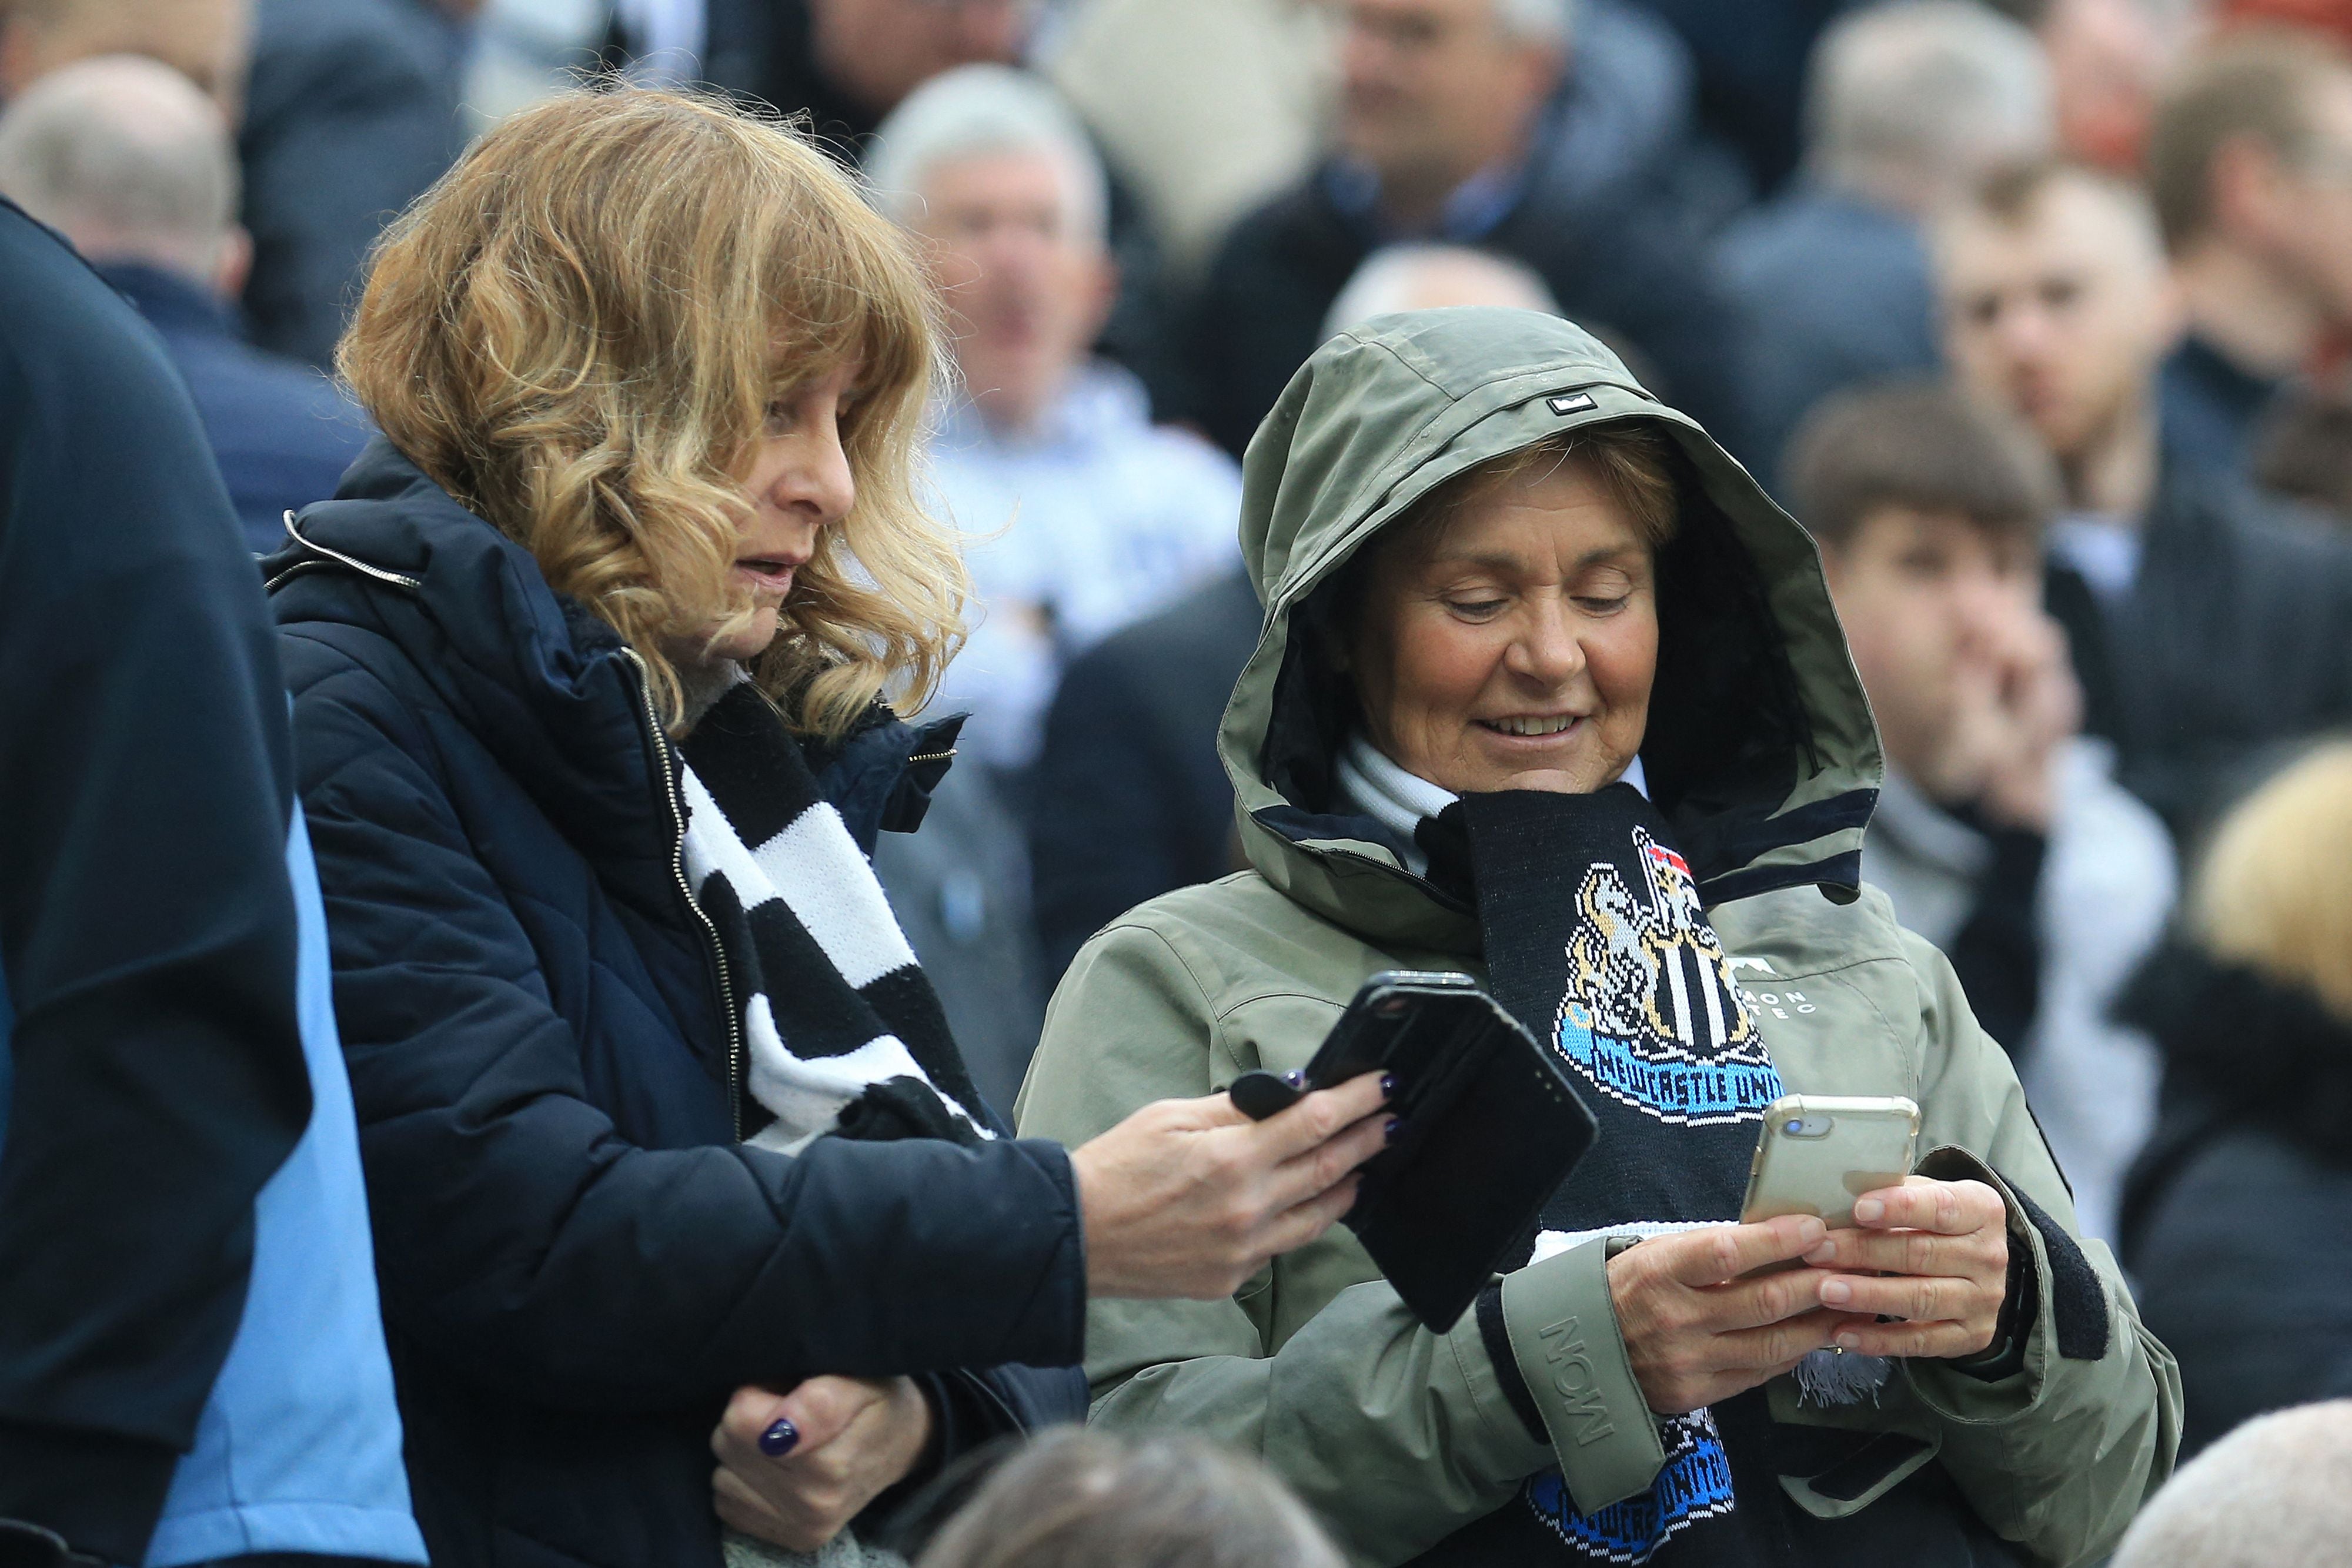 Fans check their phones as an 'Emergency Alert' is sent to smart phone owners in the UK, during the English Premier League football match between Newcastle United and Tottenham Hotspur at St James' Park in Newcastle